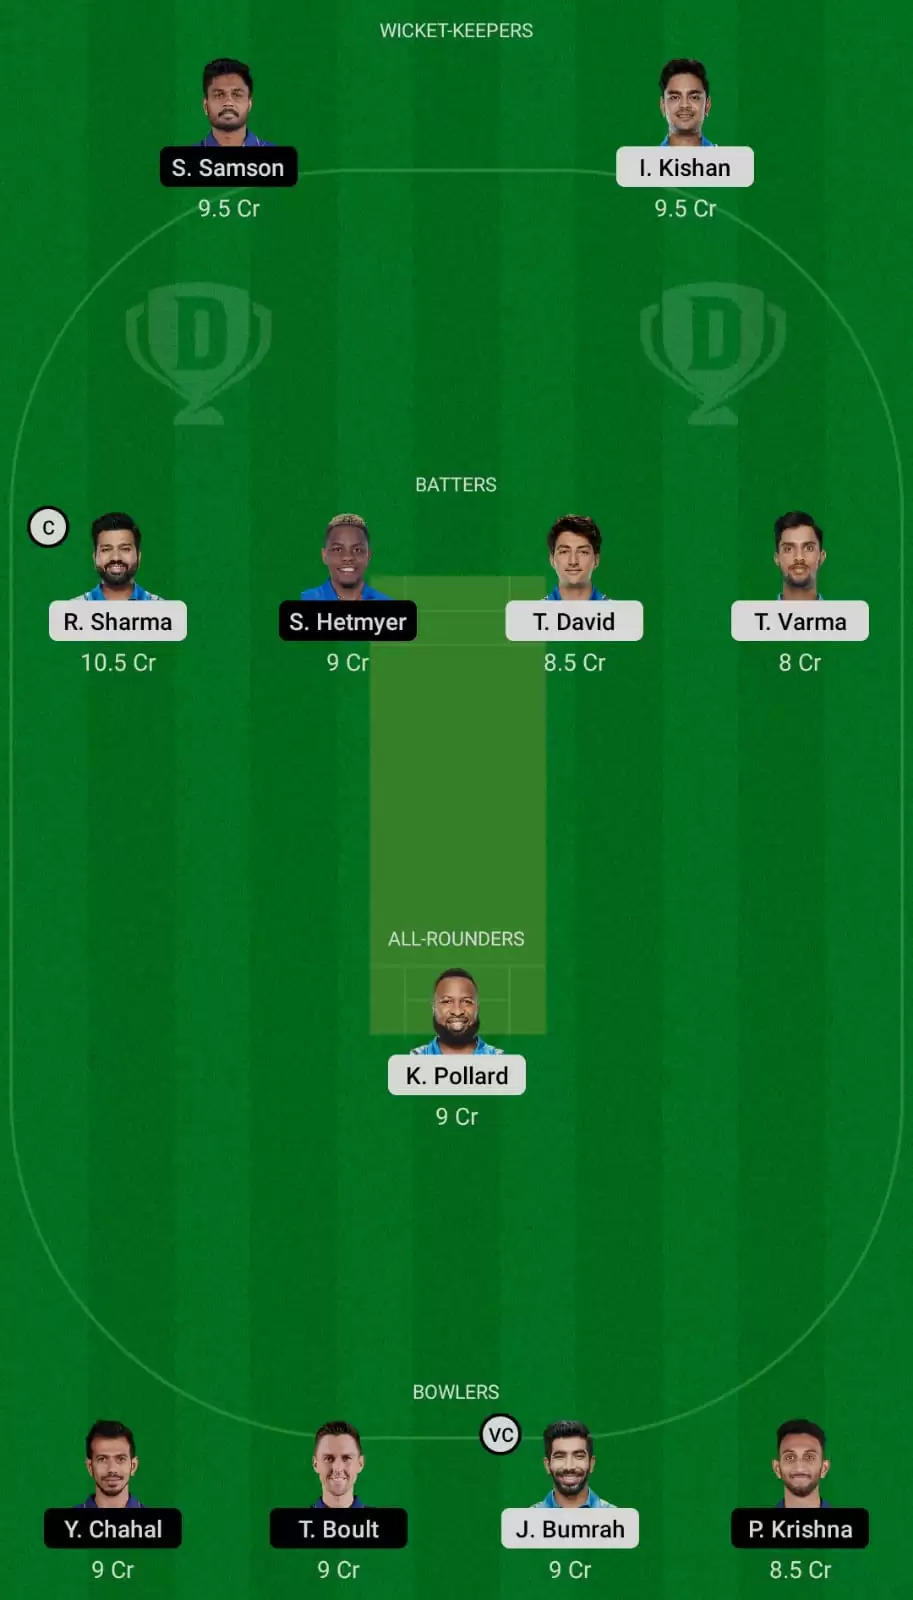 MI vs RR Dream11 Prediction, Fantasy Cricket Tips, Dream11 Team, Playing XI, Pitch Report, Injury And Weather Updates – Mumbai Indians vs Rajasthan Royals, IPL 2022, Match 9